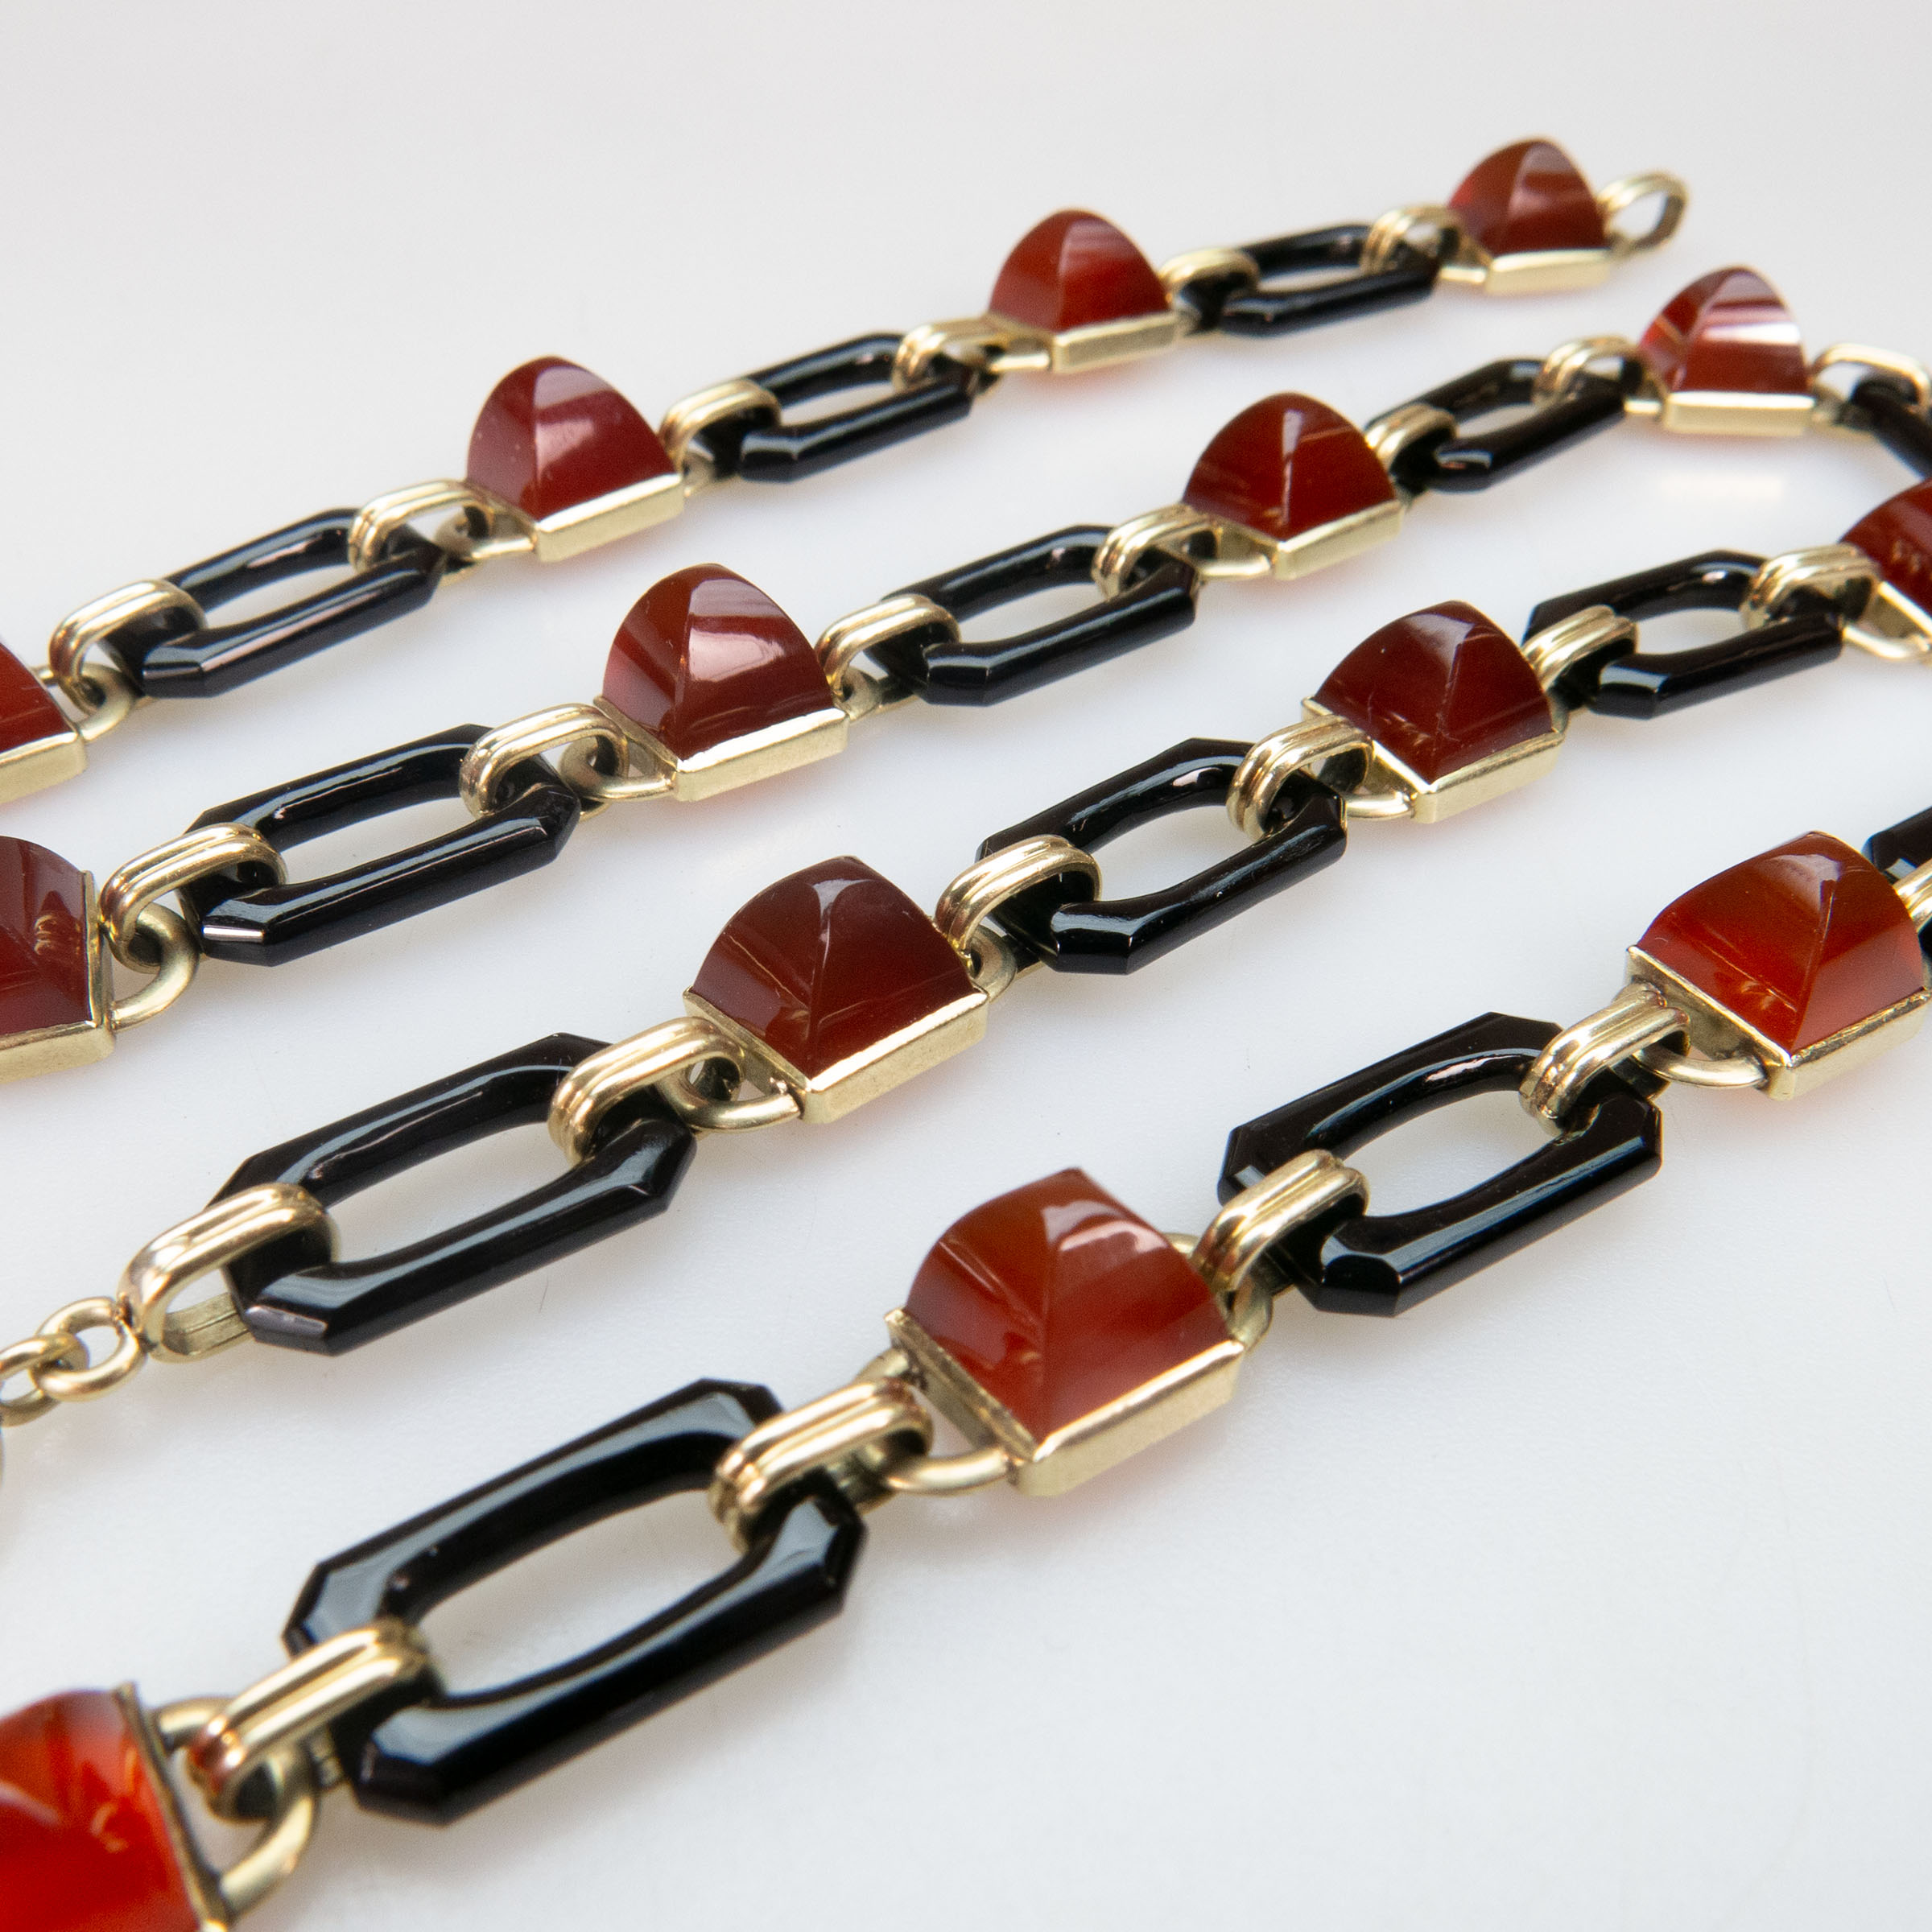 14k Yellow Gold, Onyx And Carnelian Bracelet And Necklace